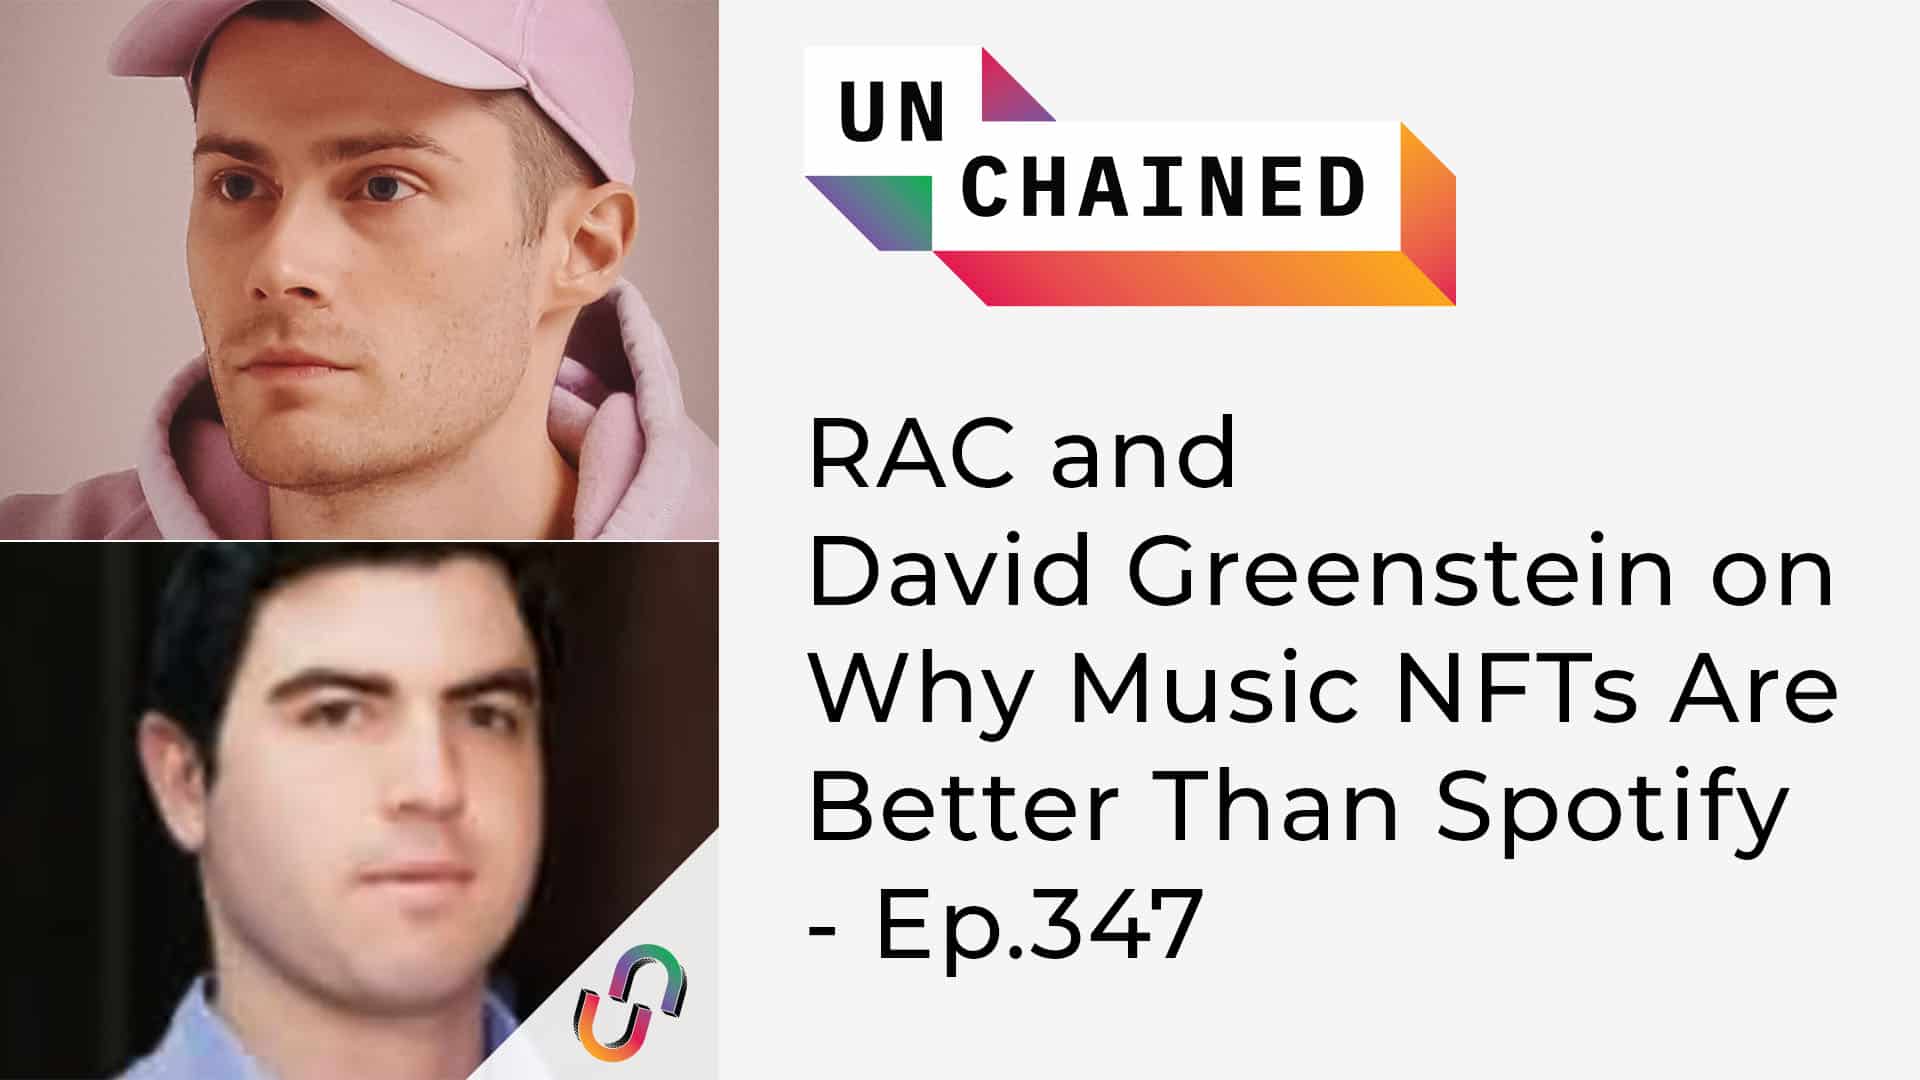 Unchained - Ep.347 - RAC and David Greenstein on Why Music NFTs Are Better Than Spotify